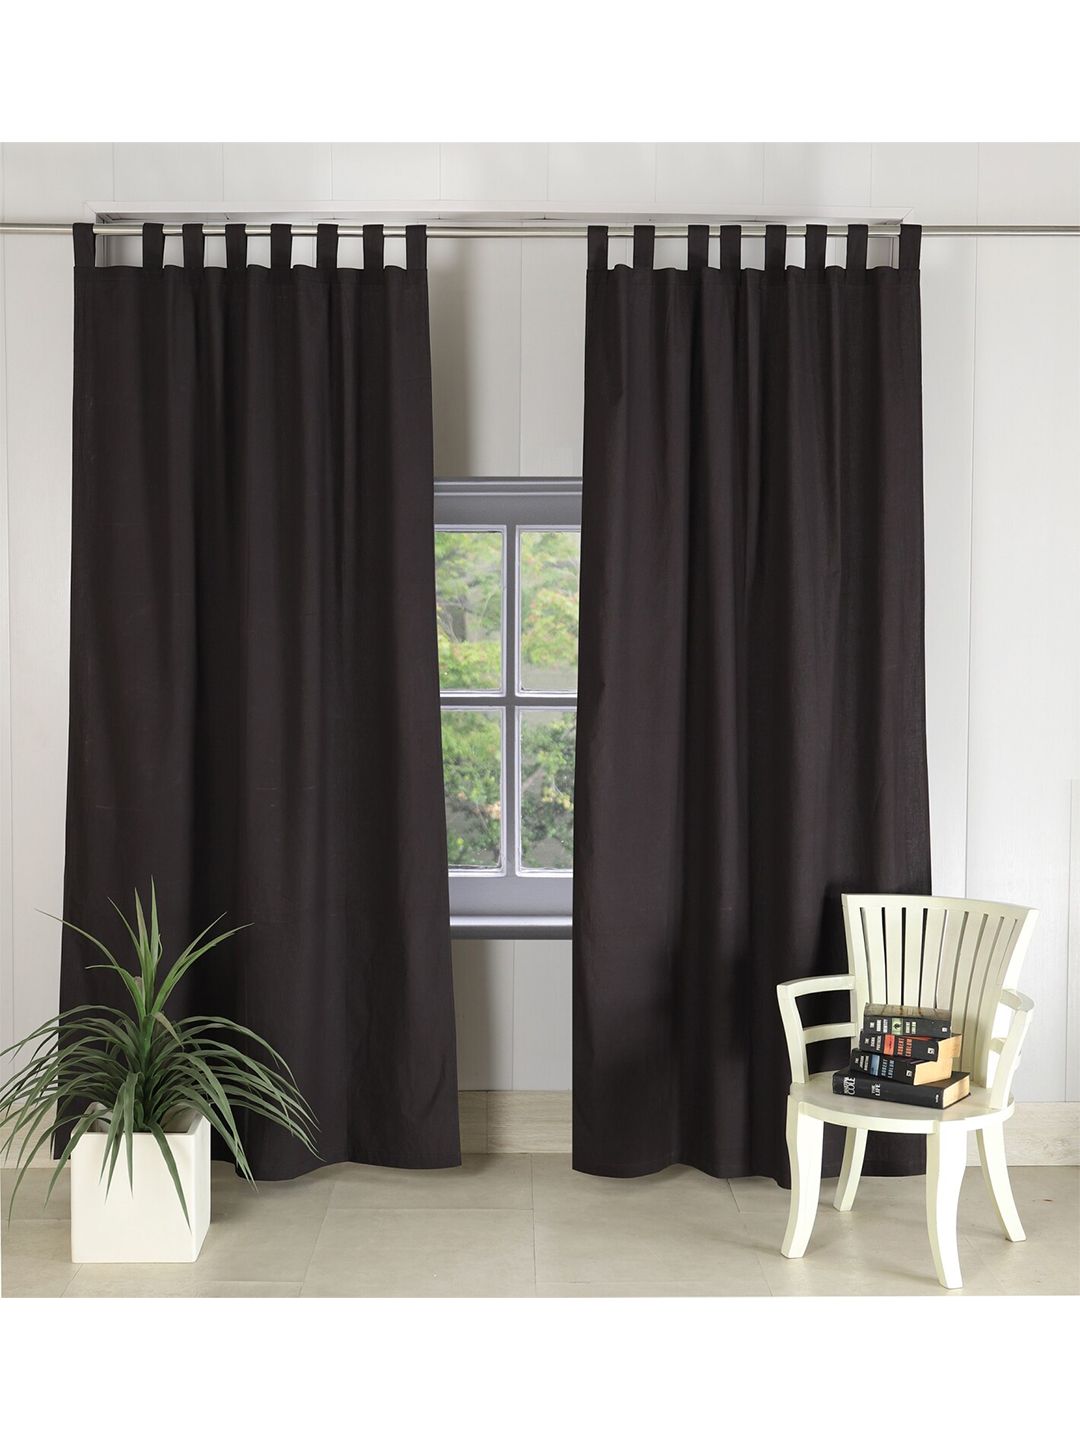 HANDICRAFT PALACE Black Set of 2 Black Out Door Curtain Price in India